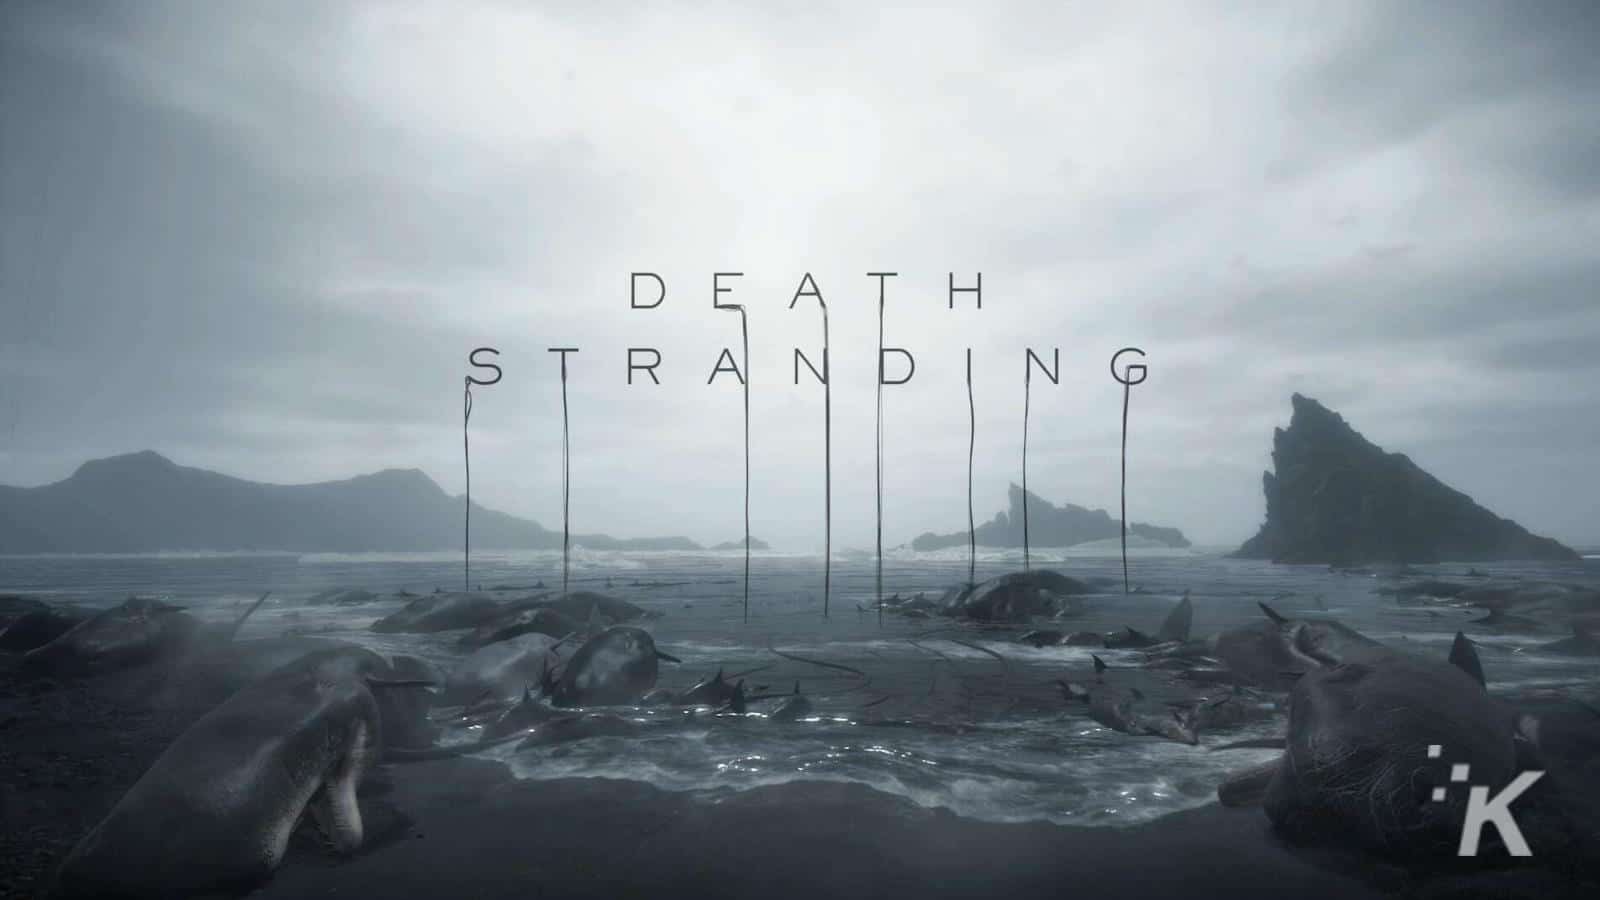 Death stranding welcome screen showing the title